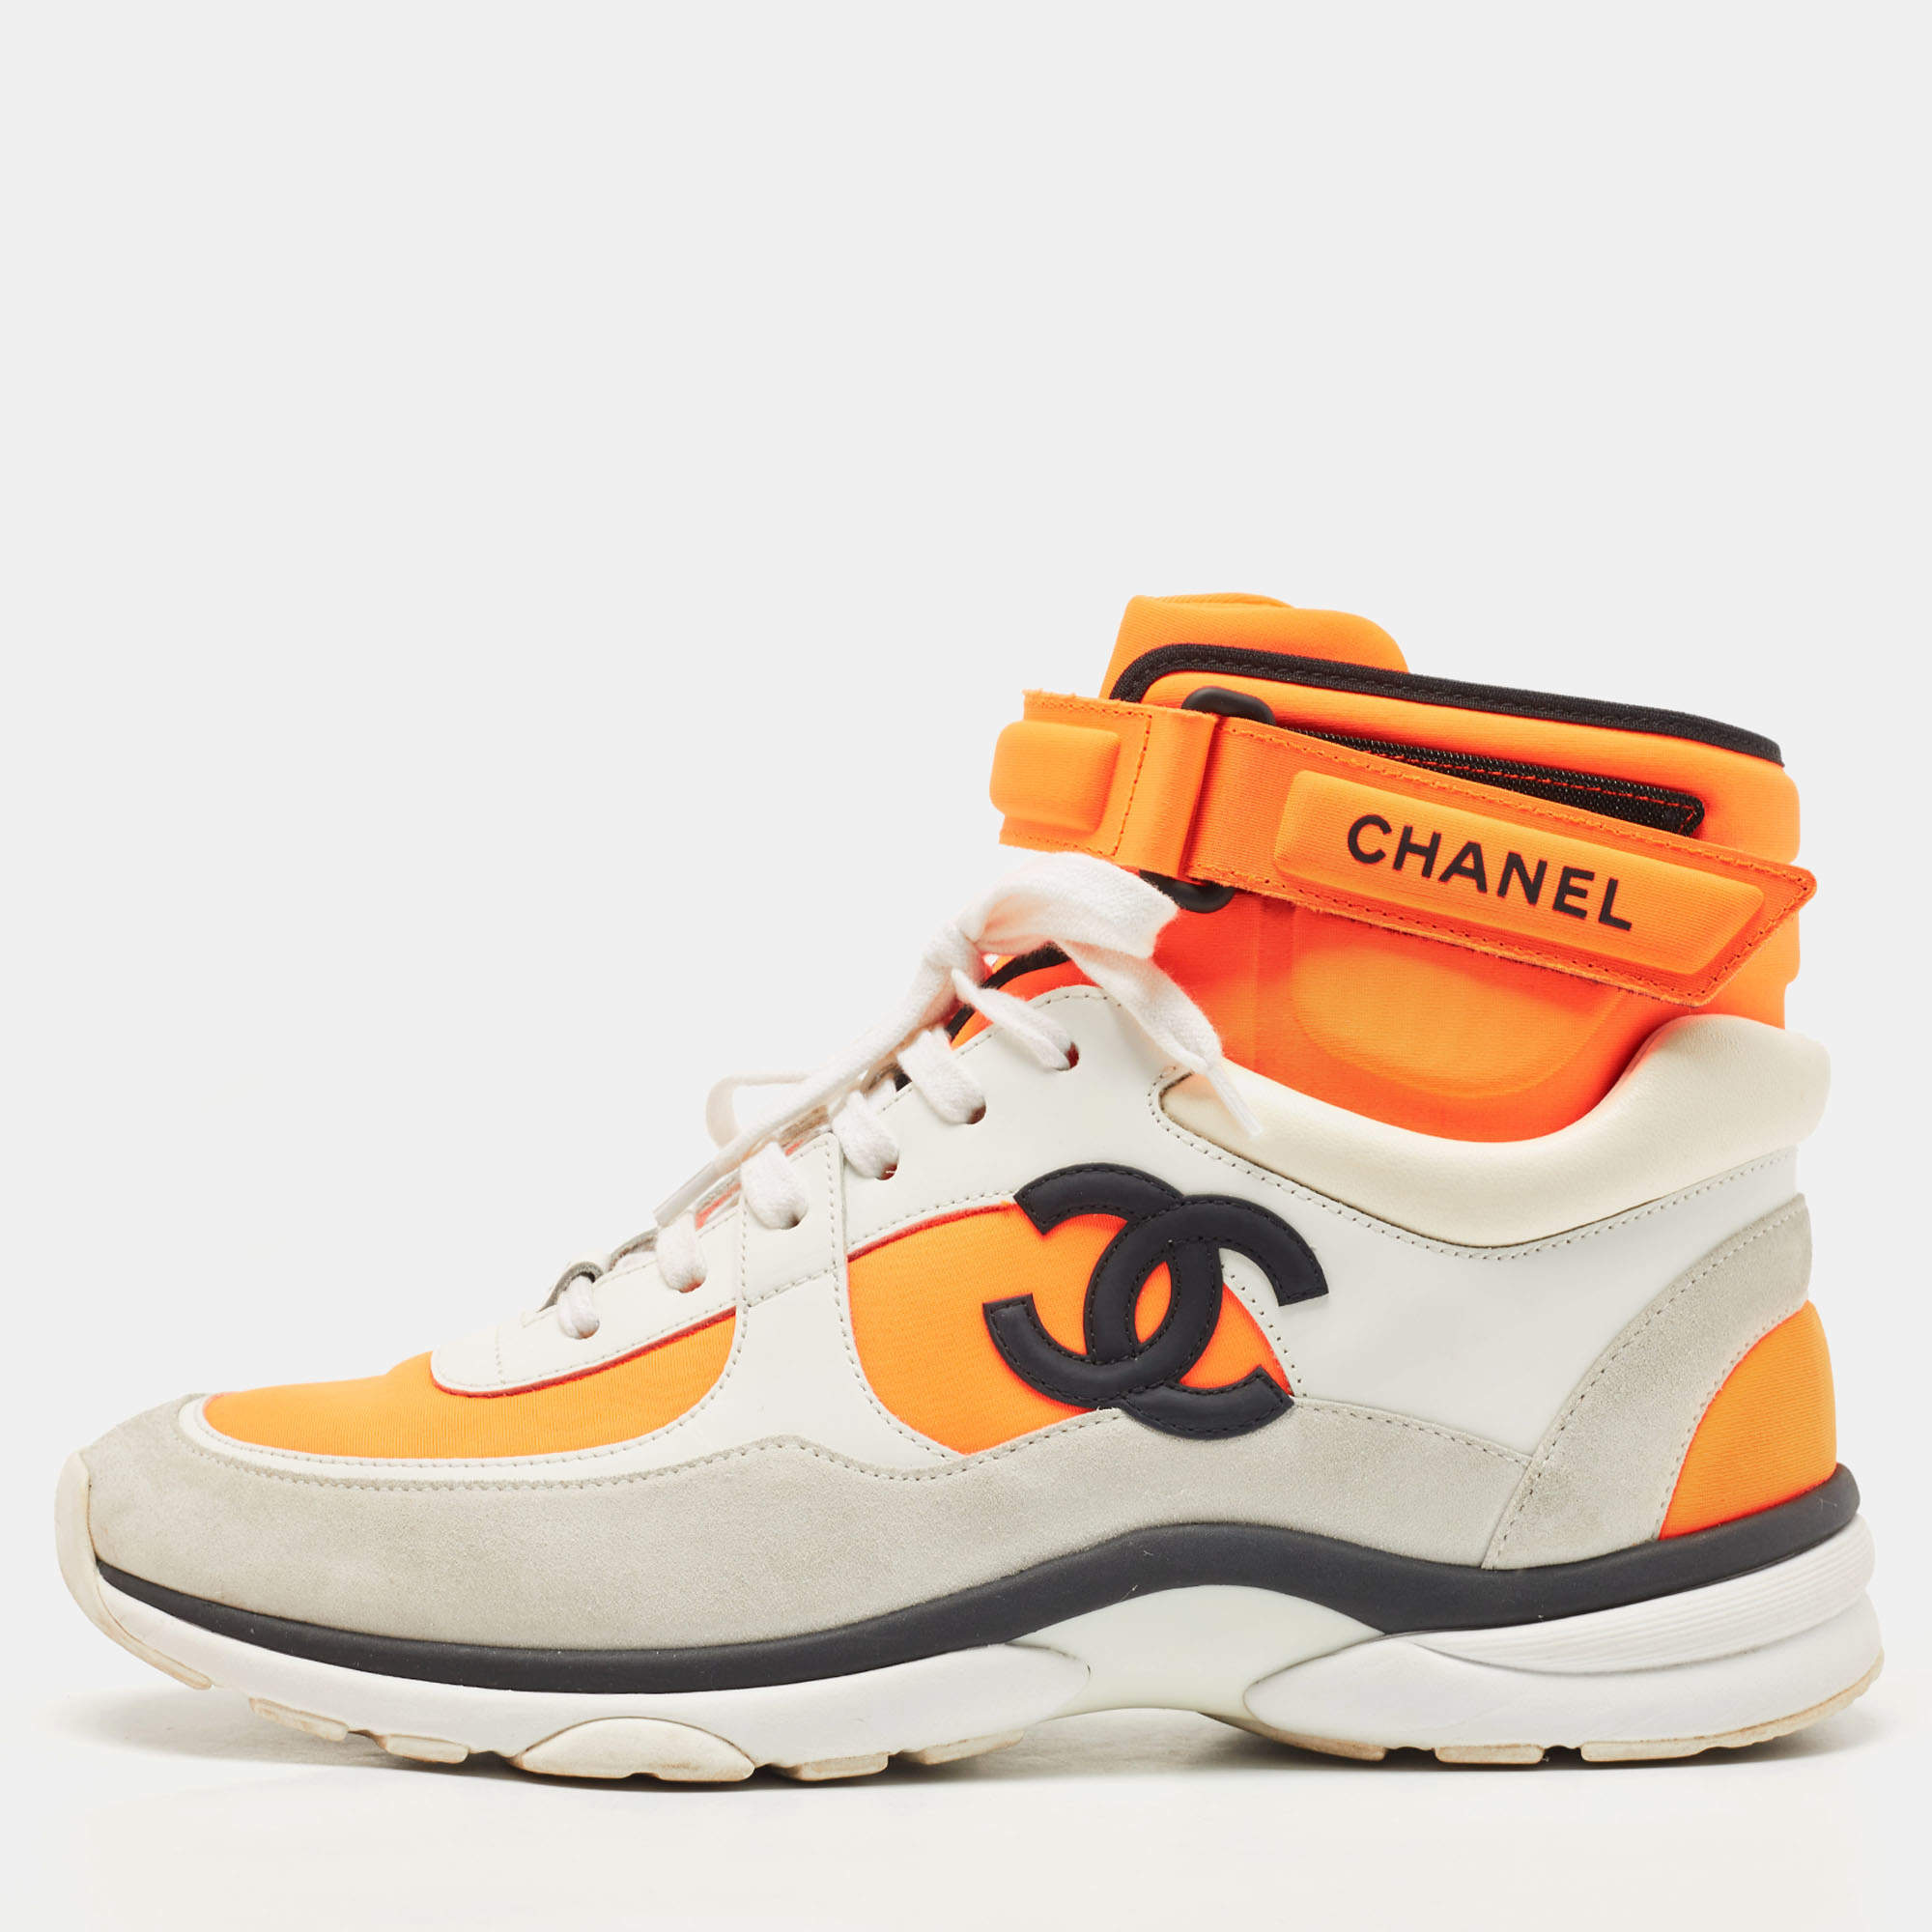 Chanel Tricolor Leather and Neoprene CC High Top Sneakers Size 41 |